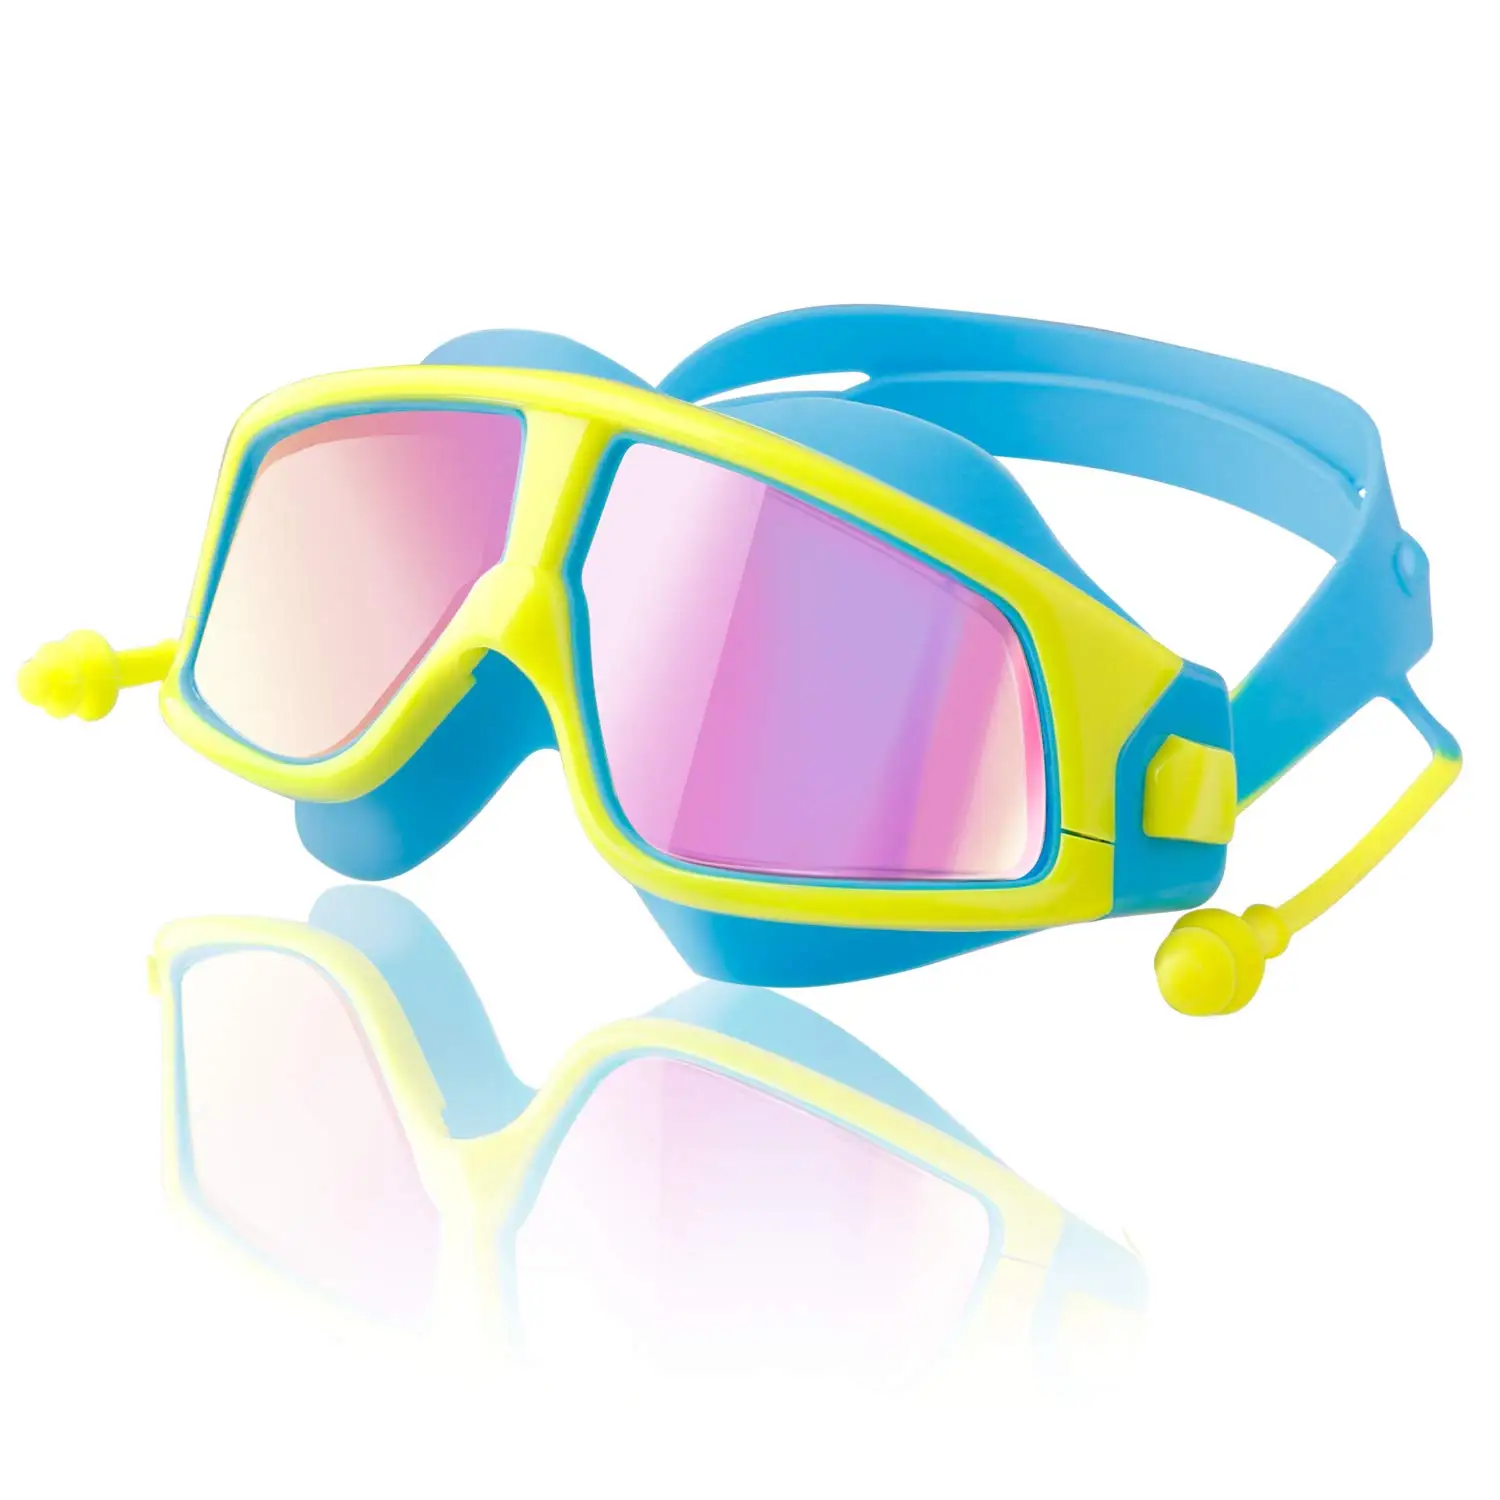 Kids Swim Goggles Age 4-12 Firesara No Leaking Swimming Goggles for Kids Junior Boys Girls Anti Fog UV Protection Crystal Clear Vision Soft Silicone Frame and Strap with Cute Case Ear Plug Nose Clip